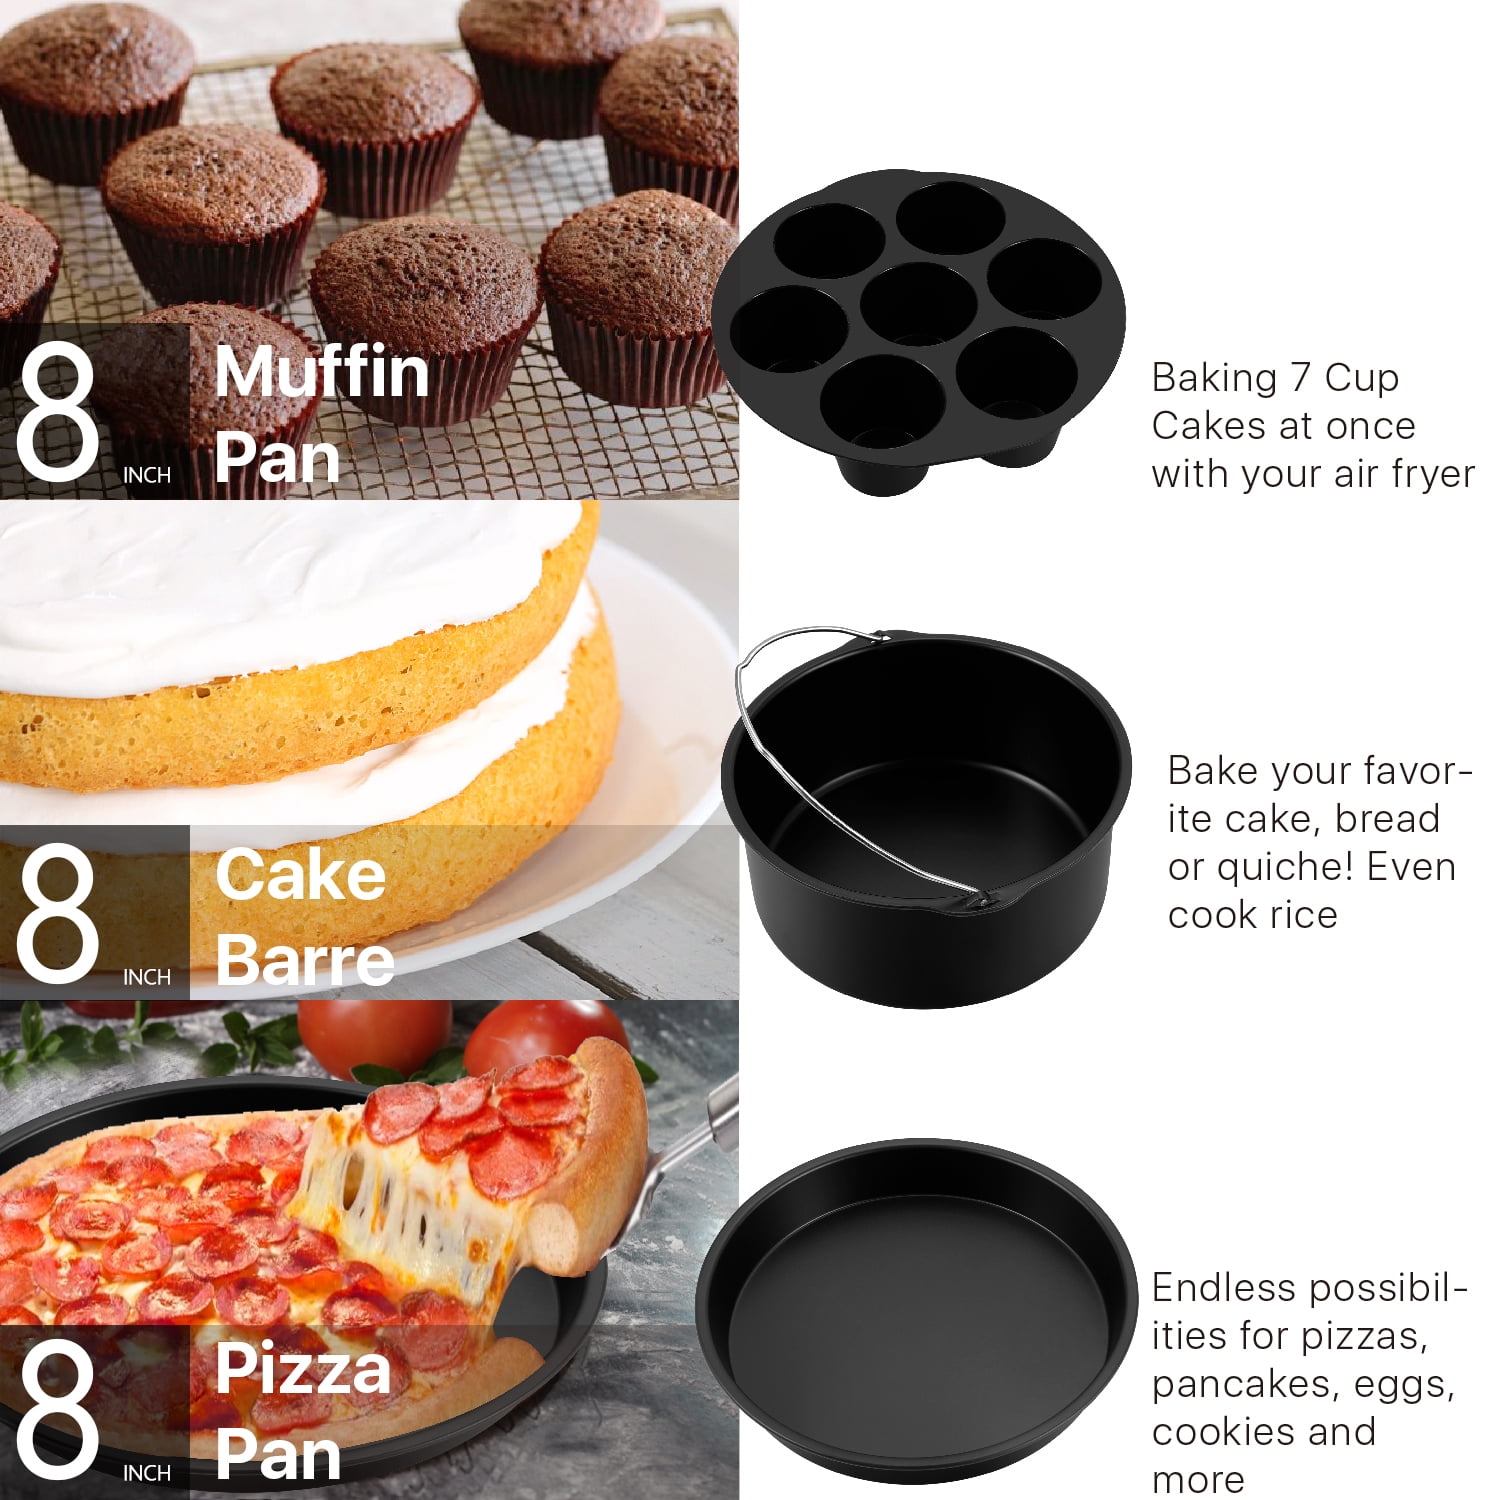  Fujampe Air Fryer Accessories - 8 Inch Cake Pan Set of 14 Pcs  Compatible for Ninja Foodi Cosori instant Pot,Gowise, Fit 4, 4.2, 5, 5.5,  5.8 QT, 6QT Accessories for Air